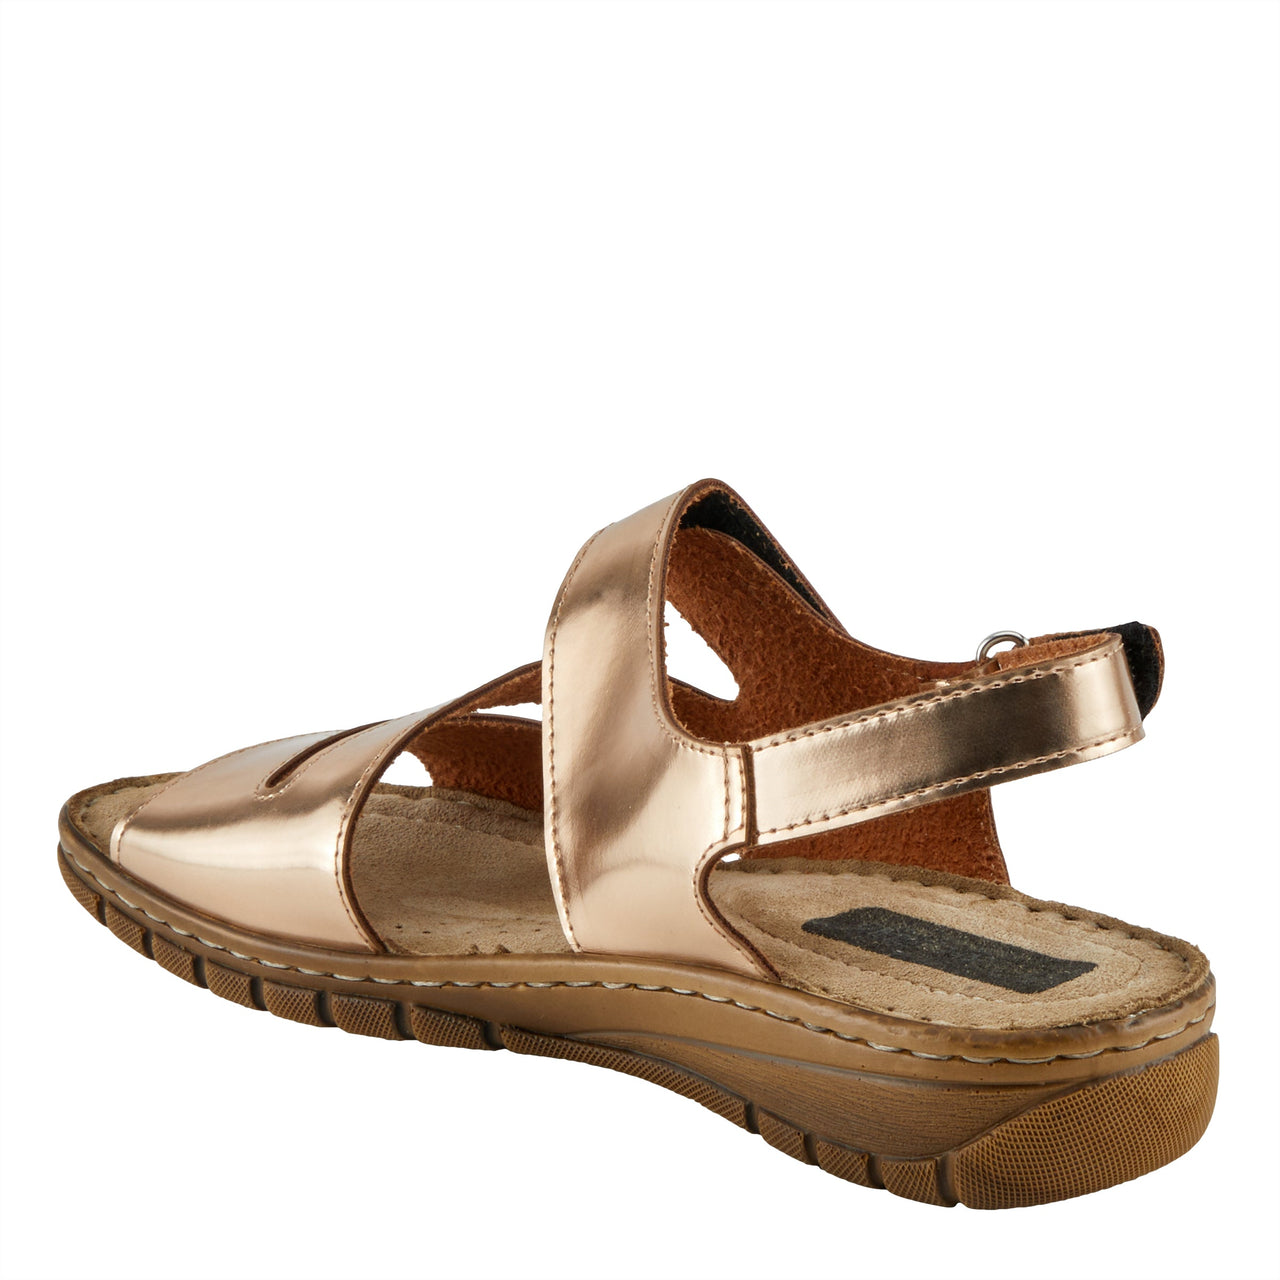 Comfortable and stylish Spring Step Shoes Flexus Maera L070 Sandal in beautiful brown color